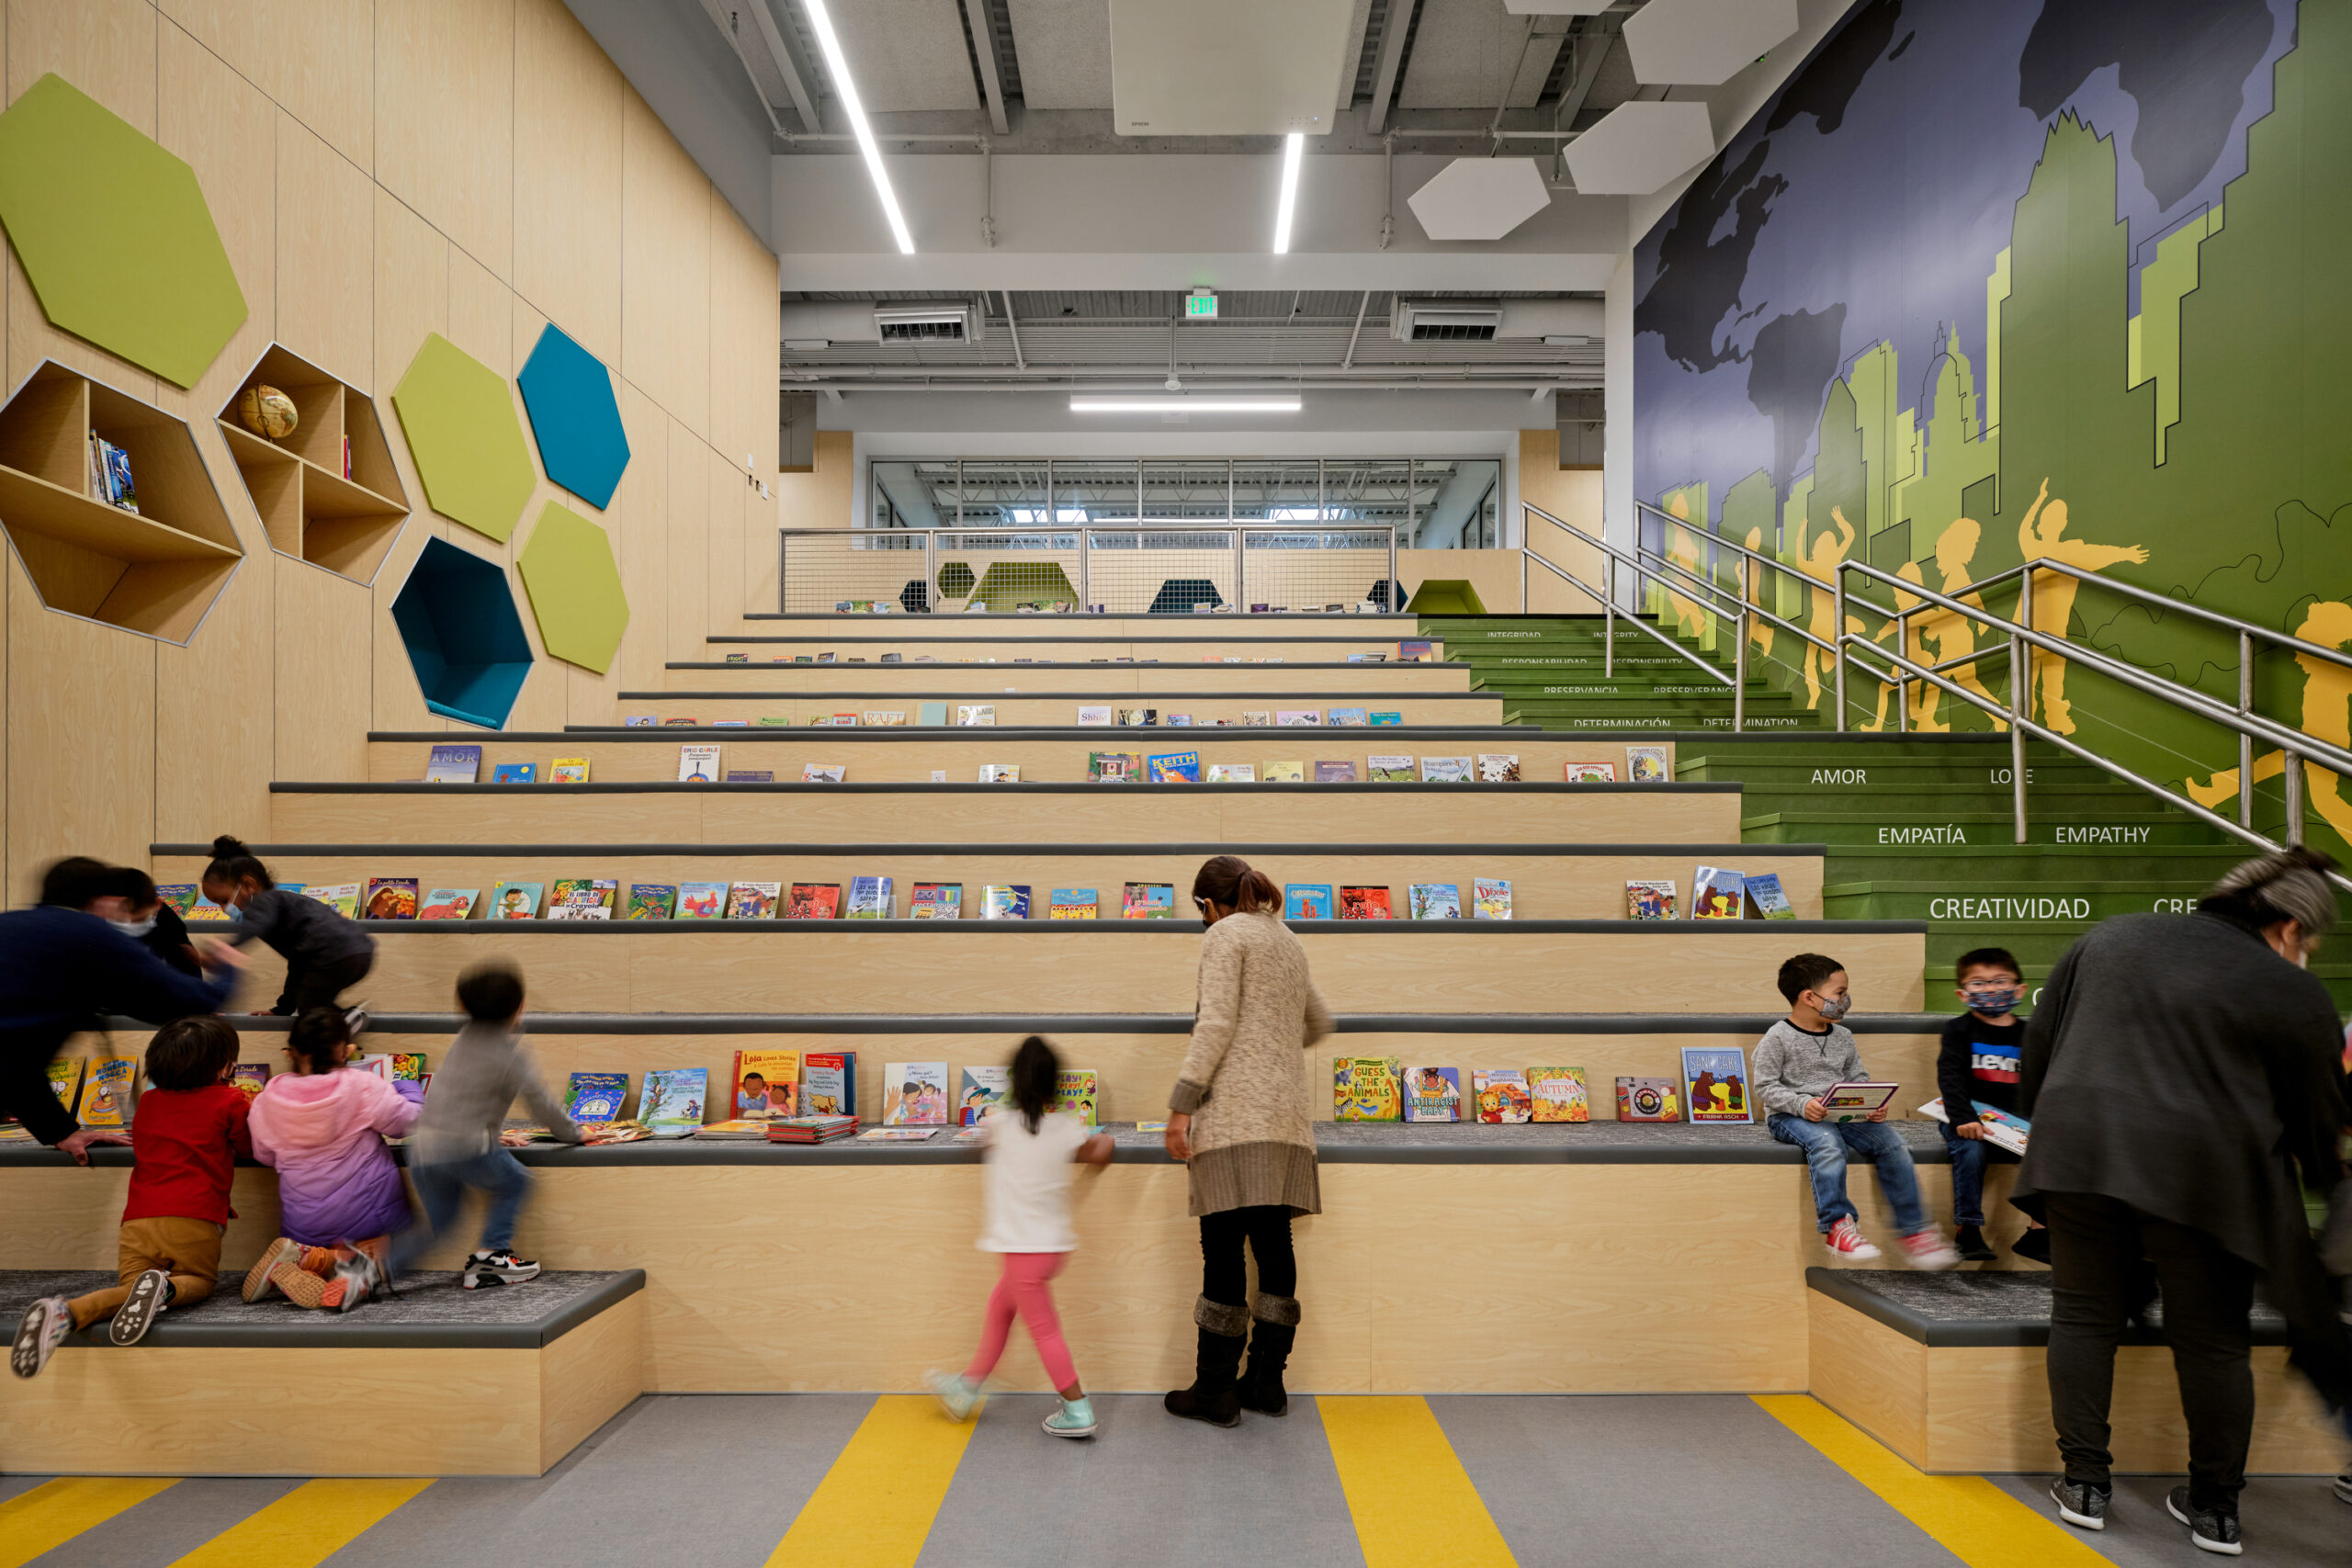 straight on view of stairway that also functions as a social gathering space in elementary school, books are displayed on the levels and children and teachers are in the foreground